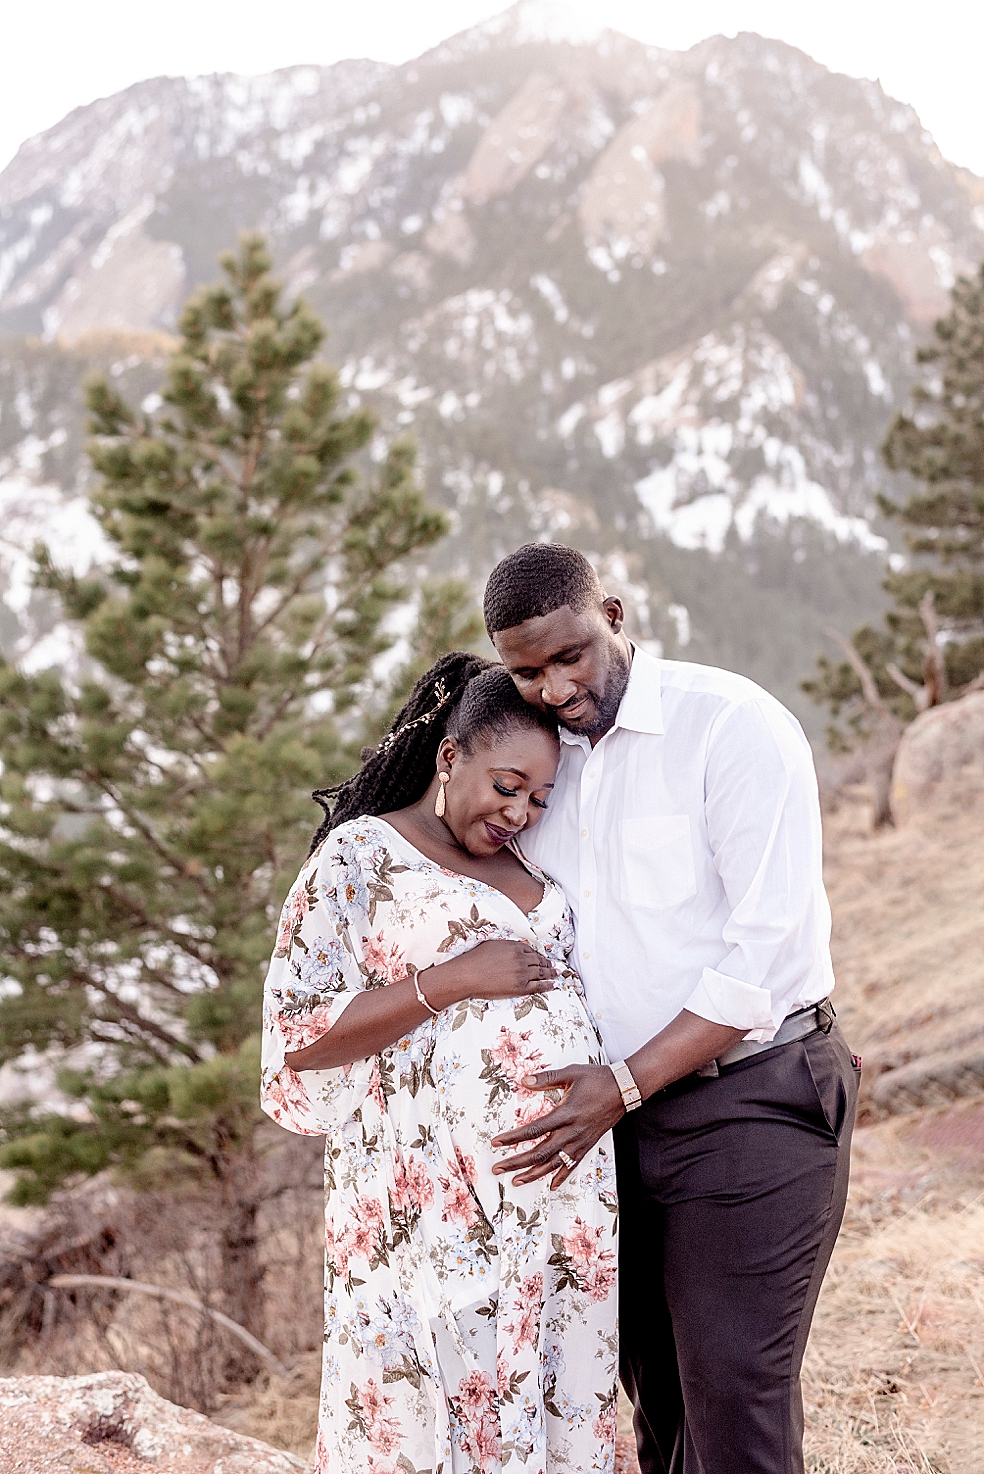 Mom and dad to be snuggling in front of snow covered mountains | Photo by Jessica Lee Photography